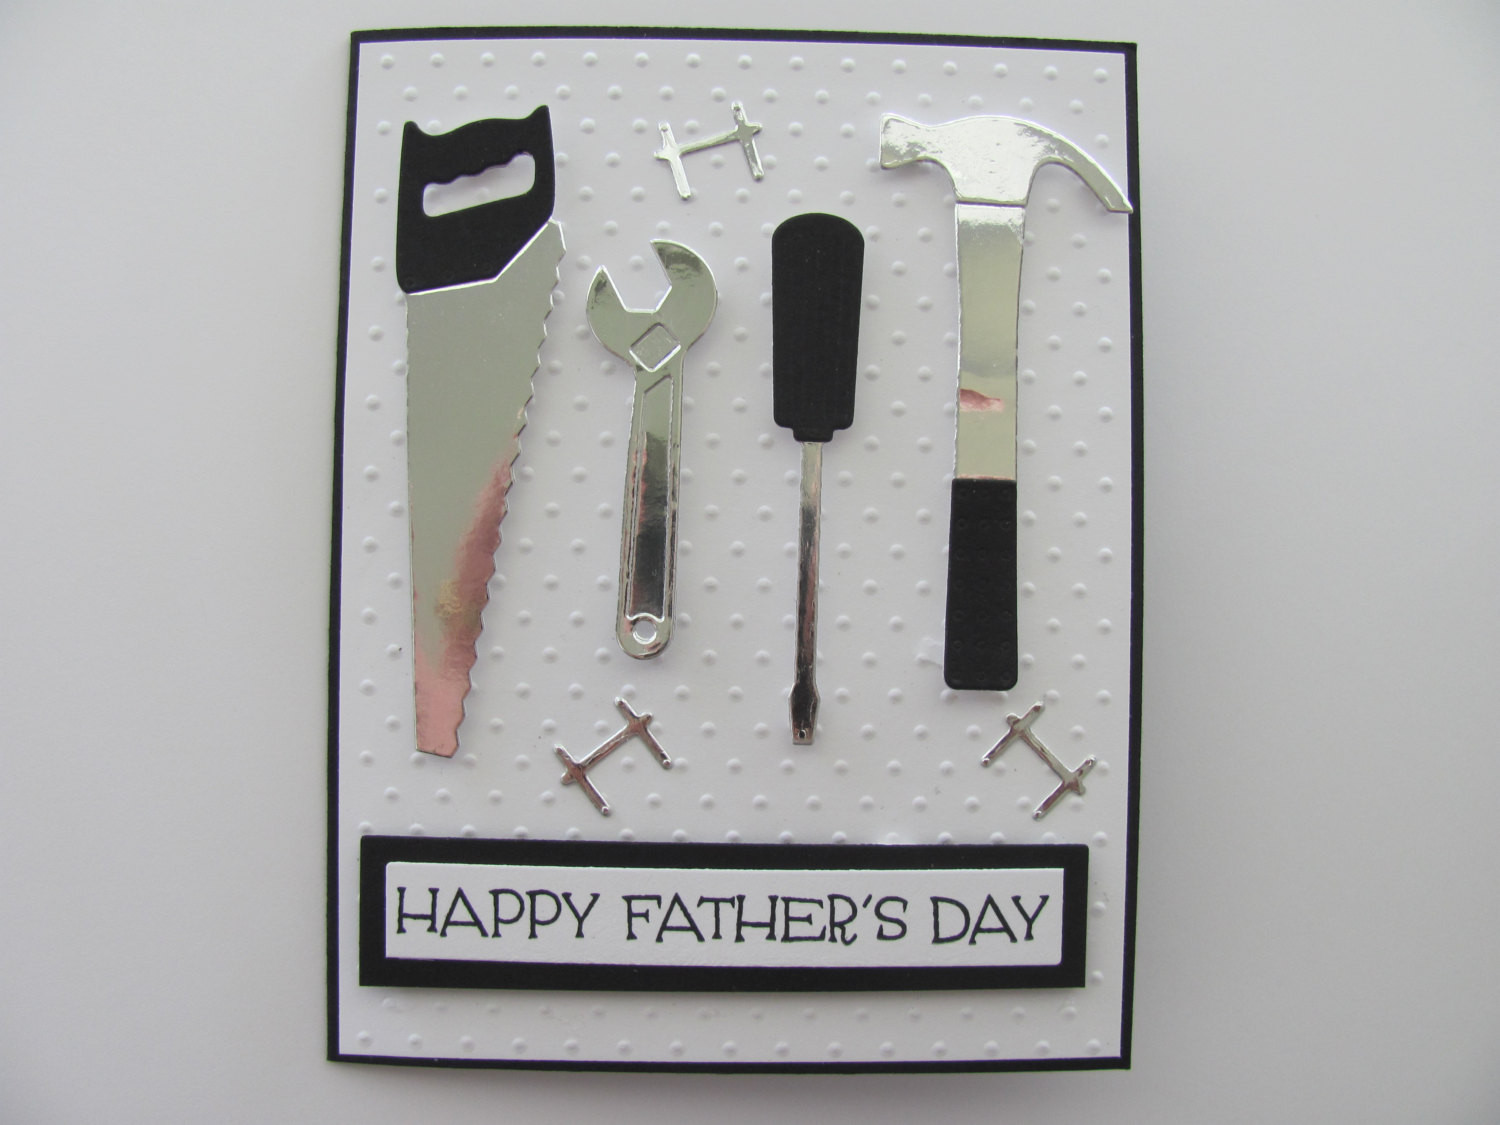 Happy Fathers Day Gift
 Tool Card Happy Fathers Day Card Gifts for Dad Tools